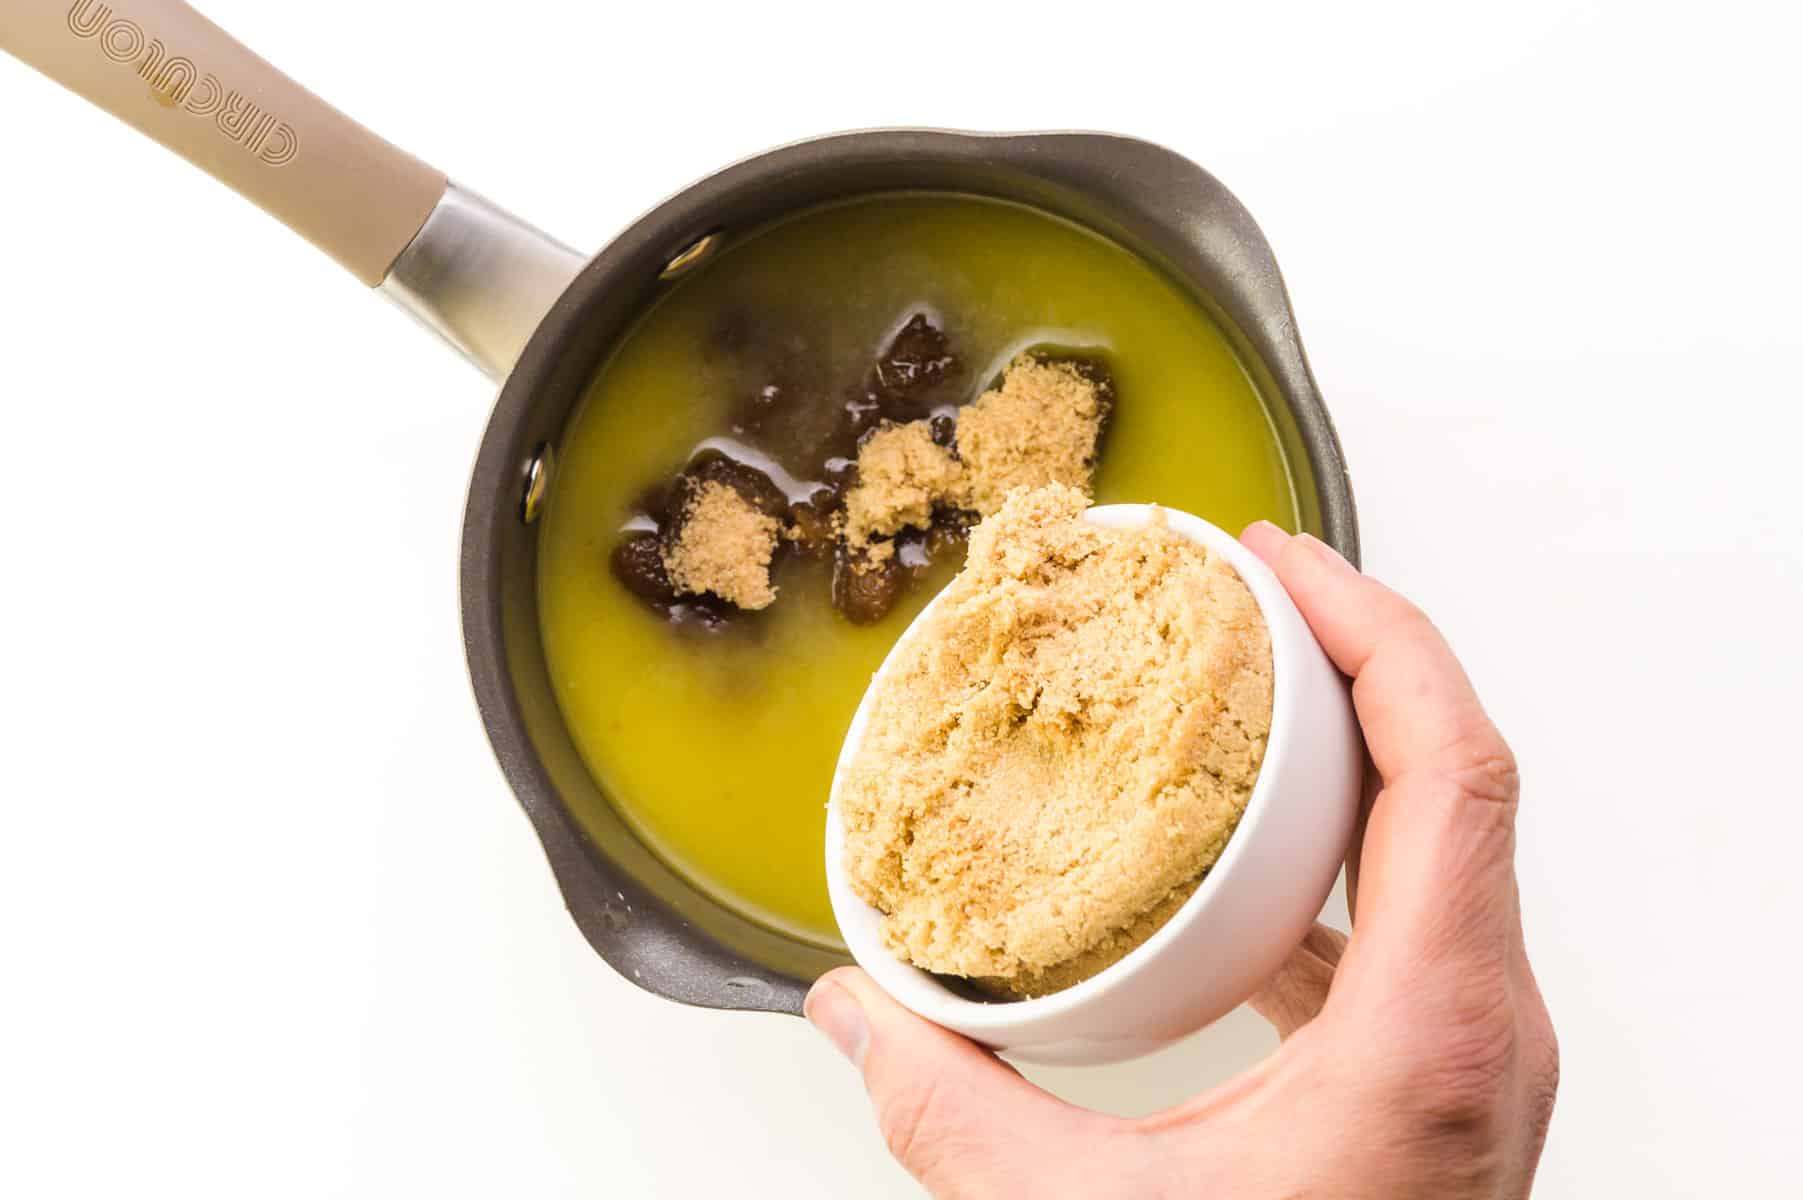 A hand holds a bowl of brown sugar, pouring it into a saucepan with melted butter.